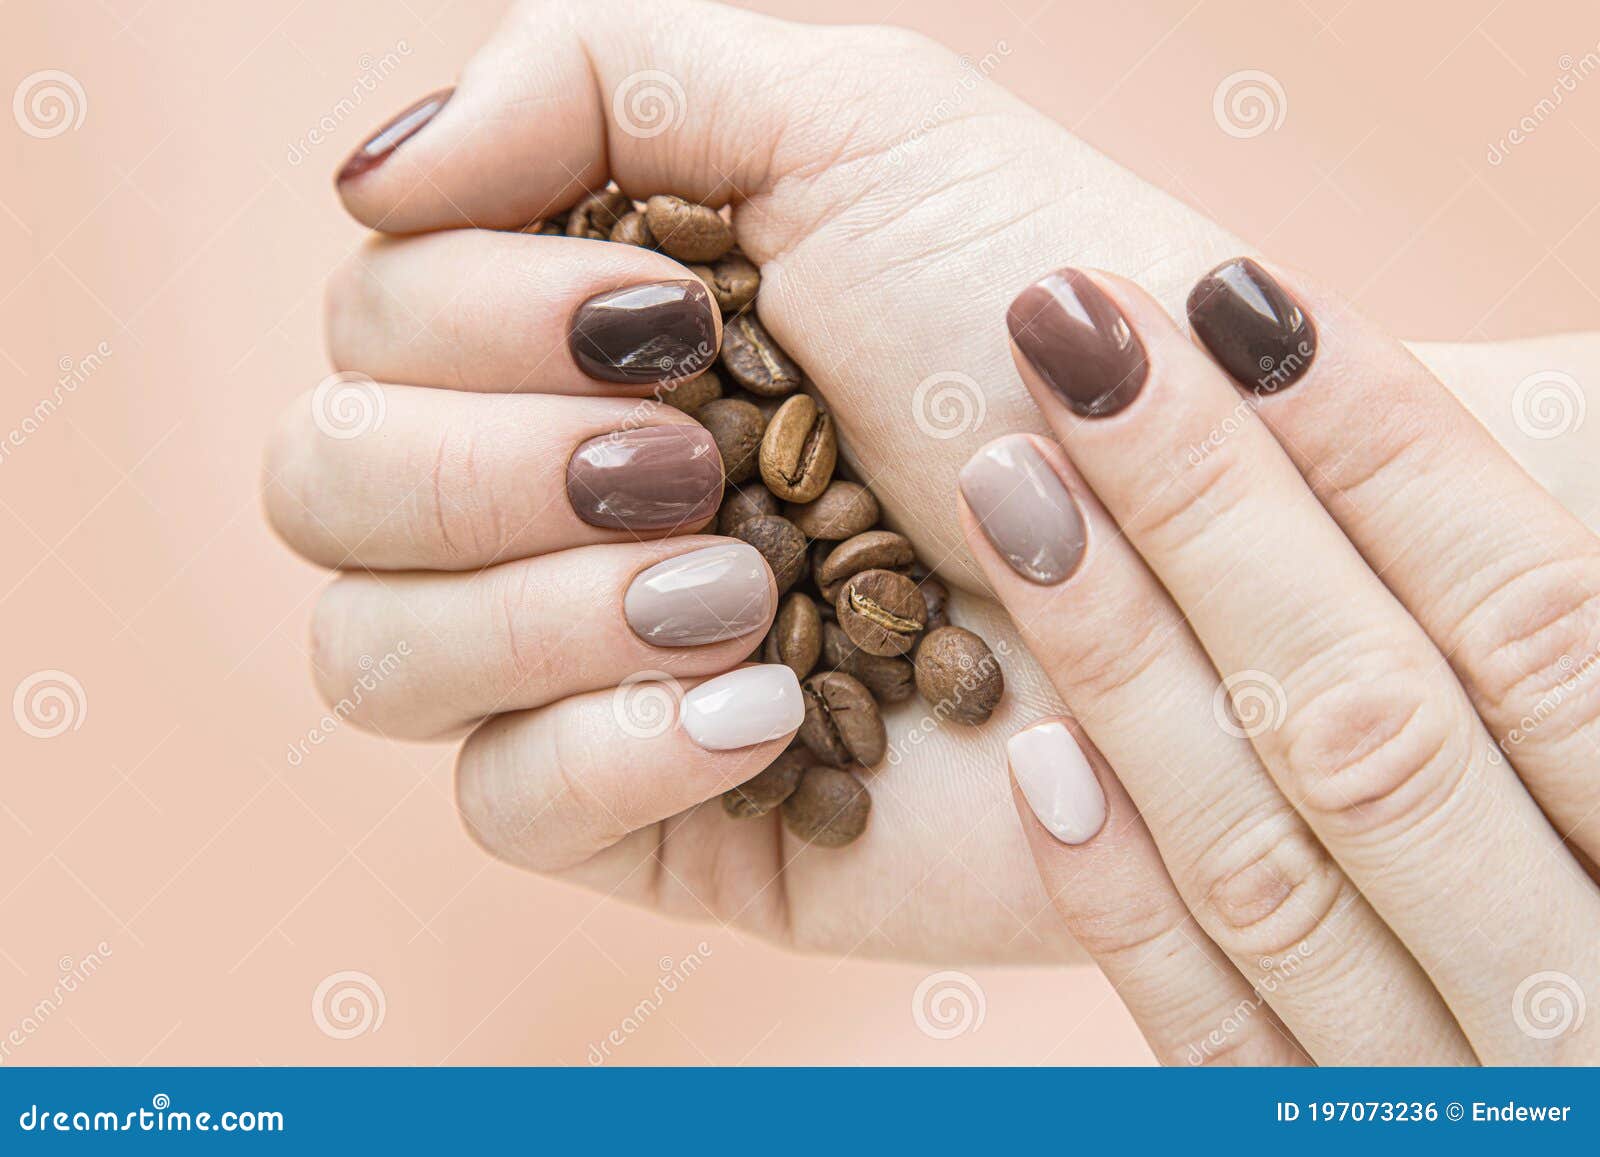 Hardware Manicure Done in a Beauty Salon. Brown Color Gradient on Nails  Stock Photo - Image of nail, fingernails: 197073236